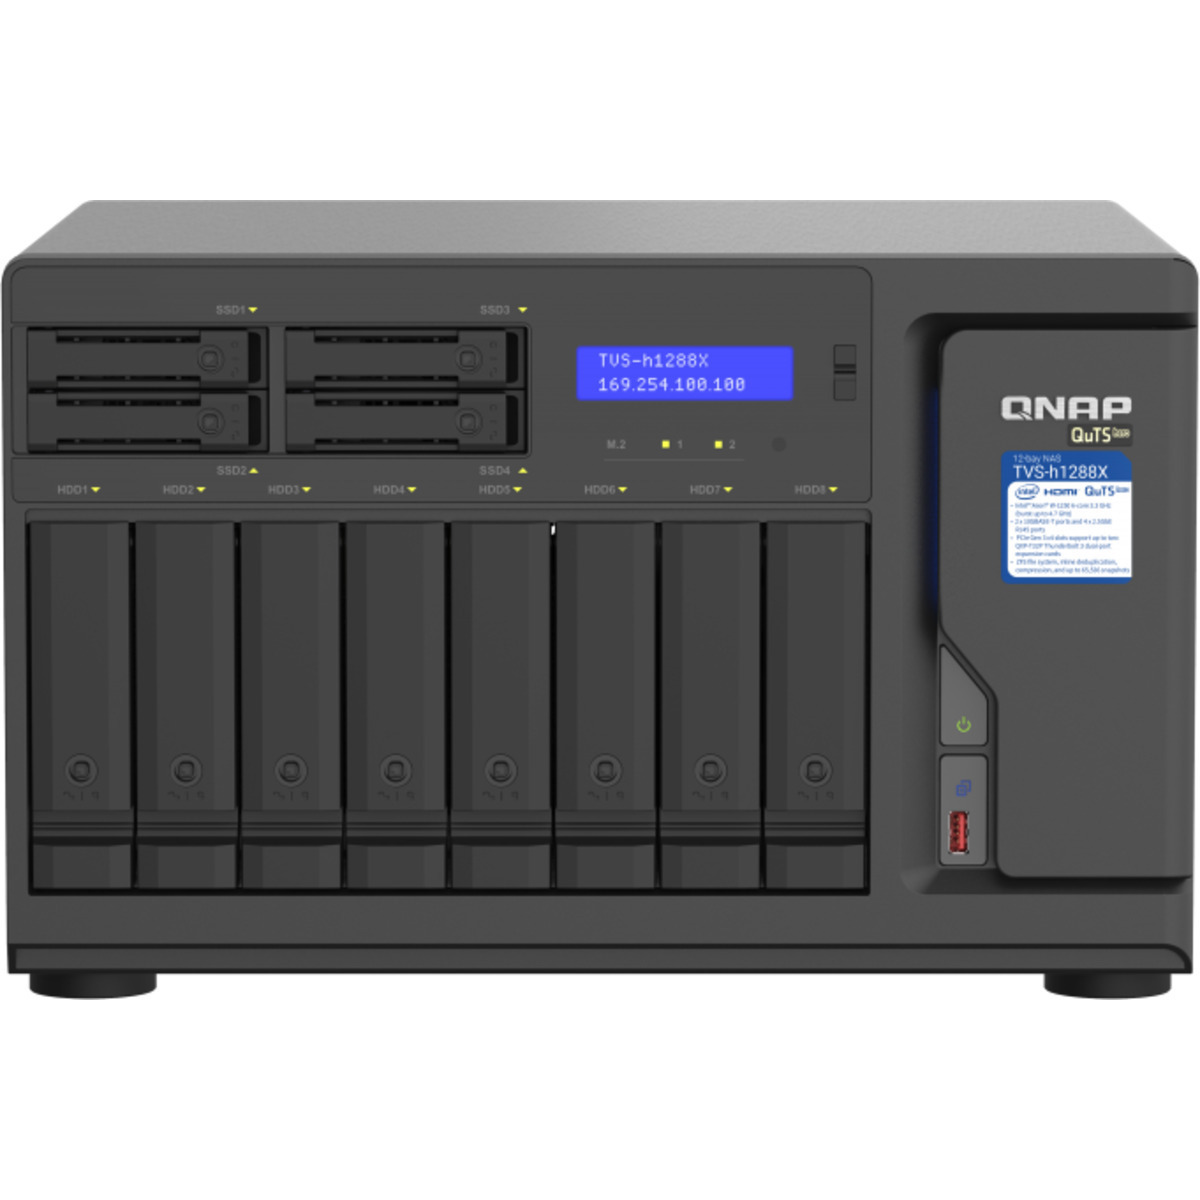 QNAP TVS-h1288X QuTS hero NAS 24tb 8+4-Bay Desktop Multimedia / Power User / Business NAS - Network Attached Storage Device 6x4tb Samsung 870 EVO MZ-77E4T0BAM 2.5 560/530MB/s SATA 6Gb/s SSD CONSUMER Class Drives Installed - Burn-In Tested - ON SALE TVS-h1288X QuTS hero NAS